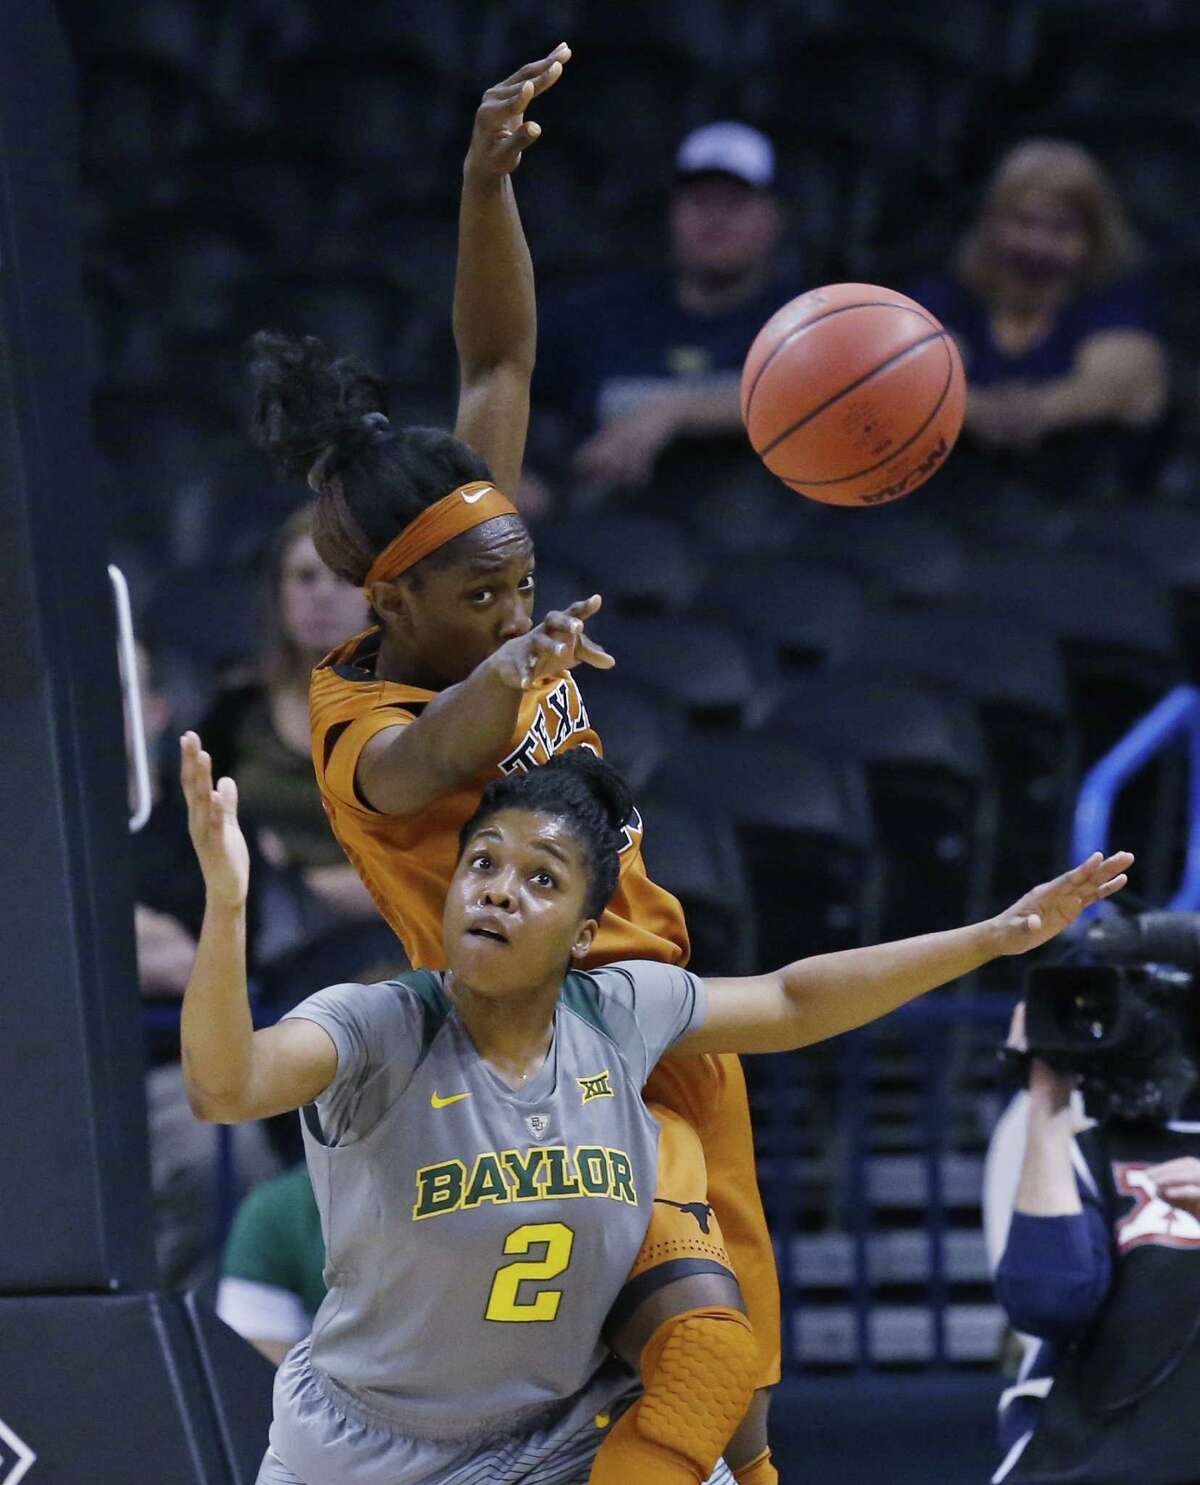 Texas guard Lashann Higgs, rear, and Baylor guard Niya Johnson (2) reach for a loose ball in the first quarter of an NCAA college basketball championship game in the Big 12 women's tournament in Oklahoma City, Monday, March 7, 2016. (AP Photo/Sue Ogrocki)